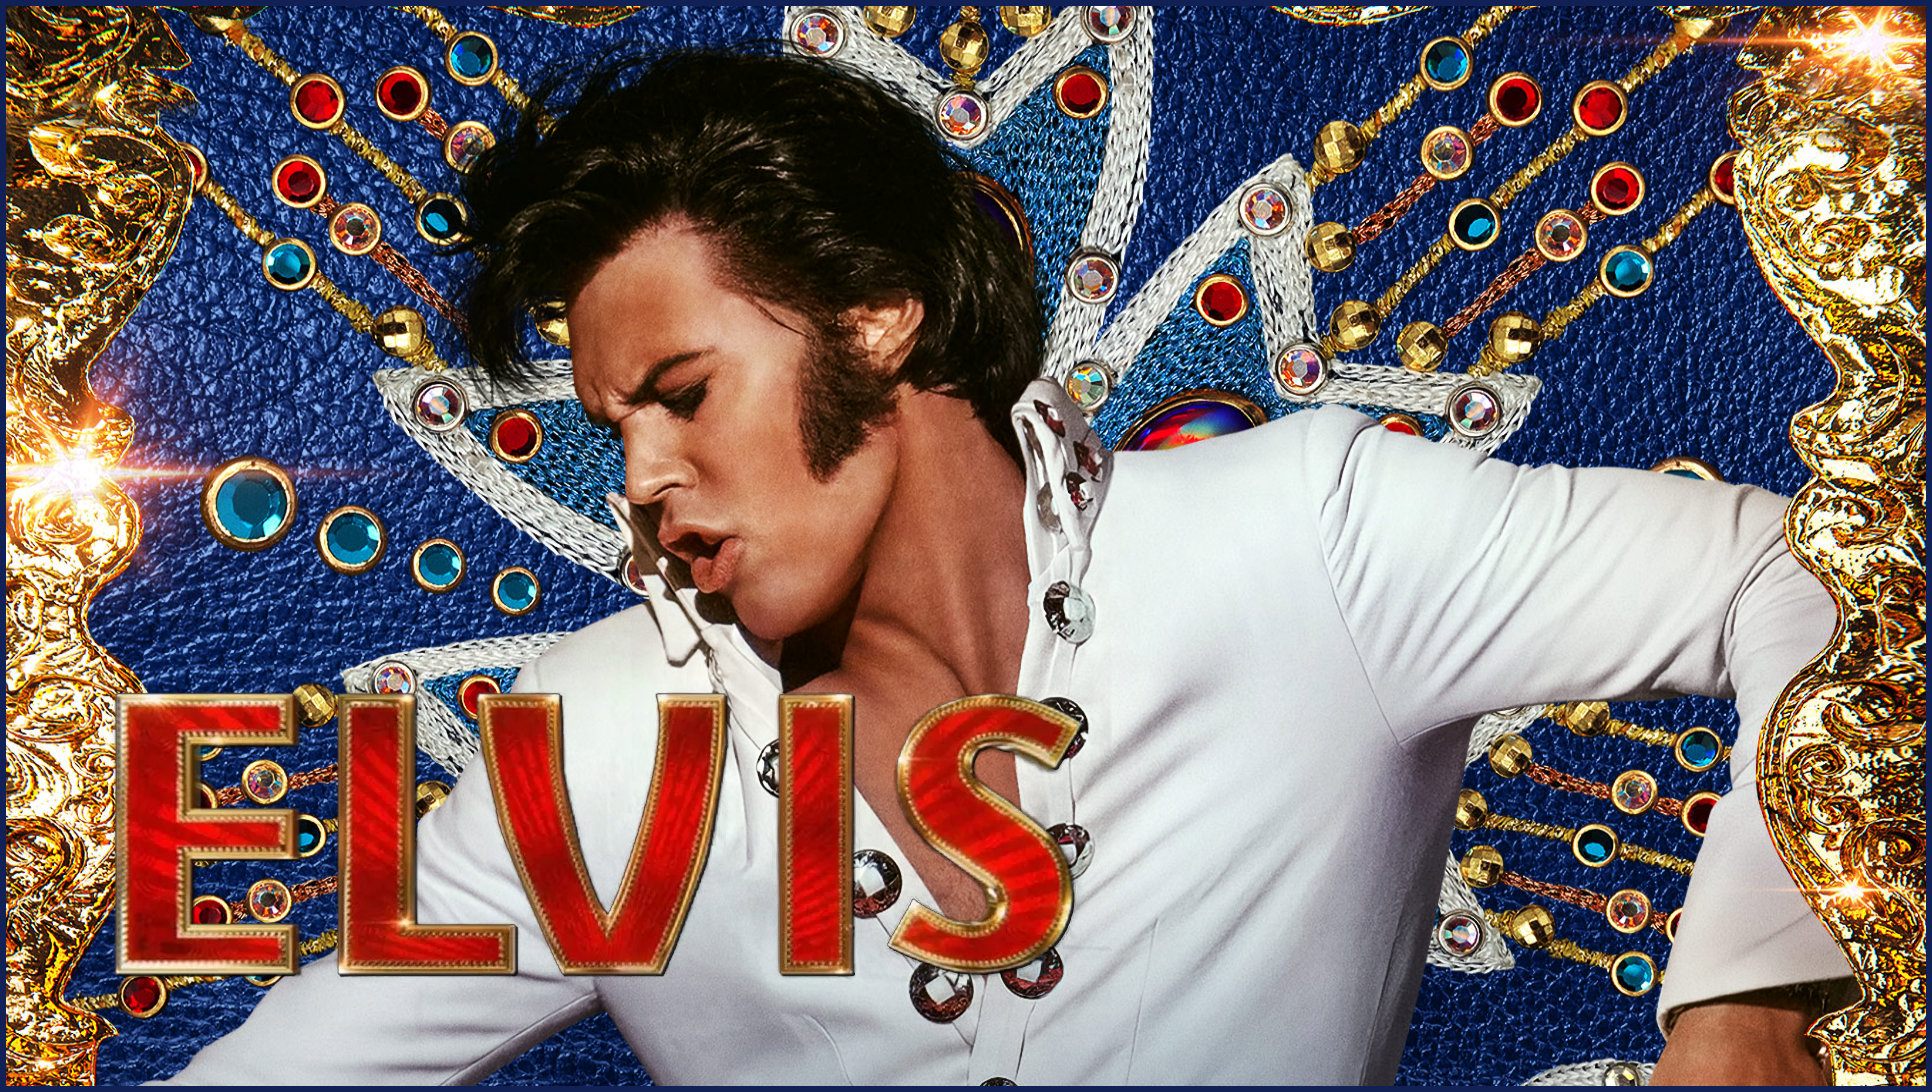 Warner Bros. Gets All Shook Up With The First Posters From Baz Luhrmann's ELVIS Biopic of the Force